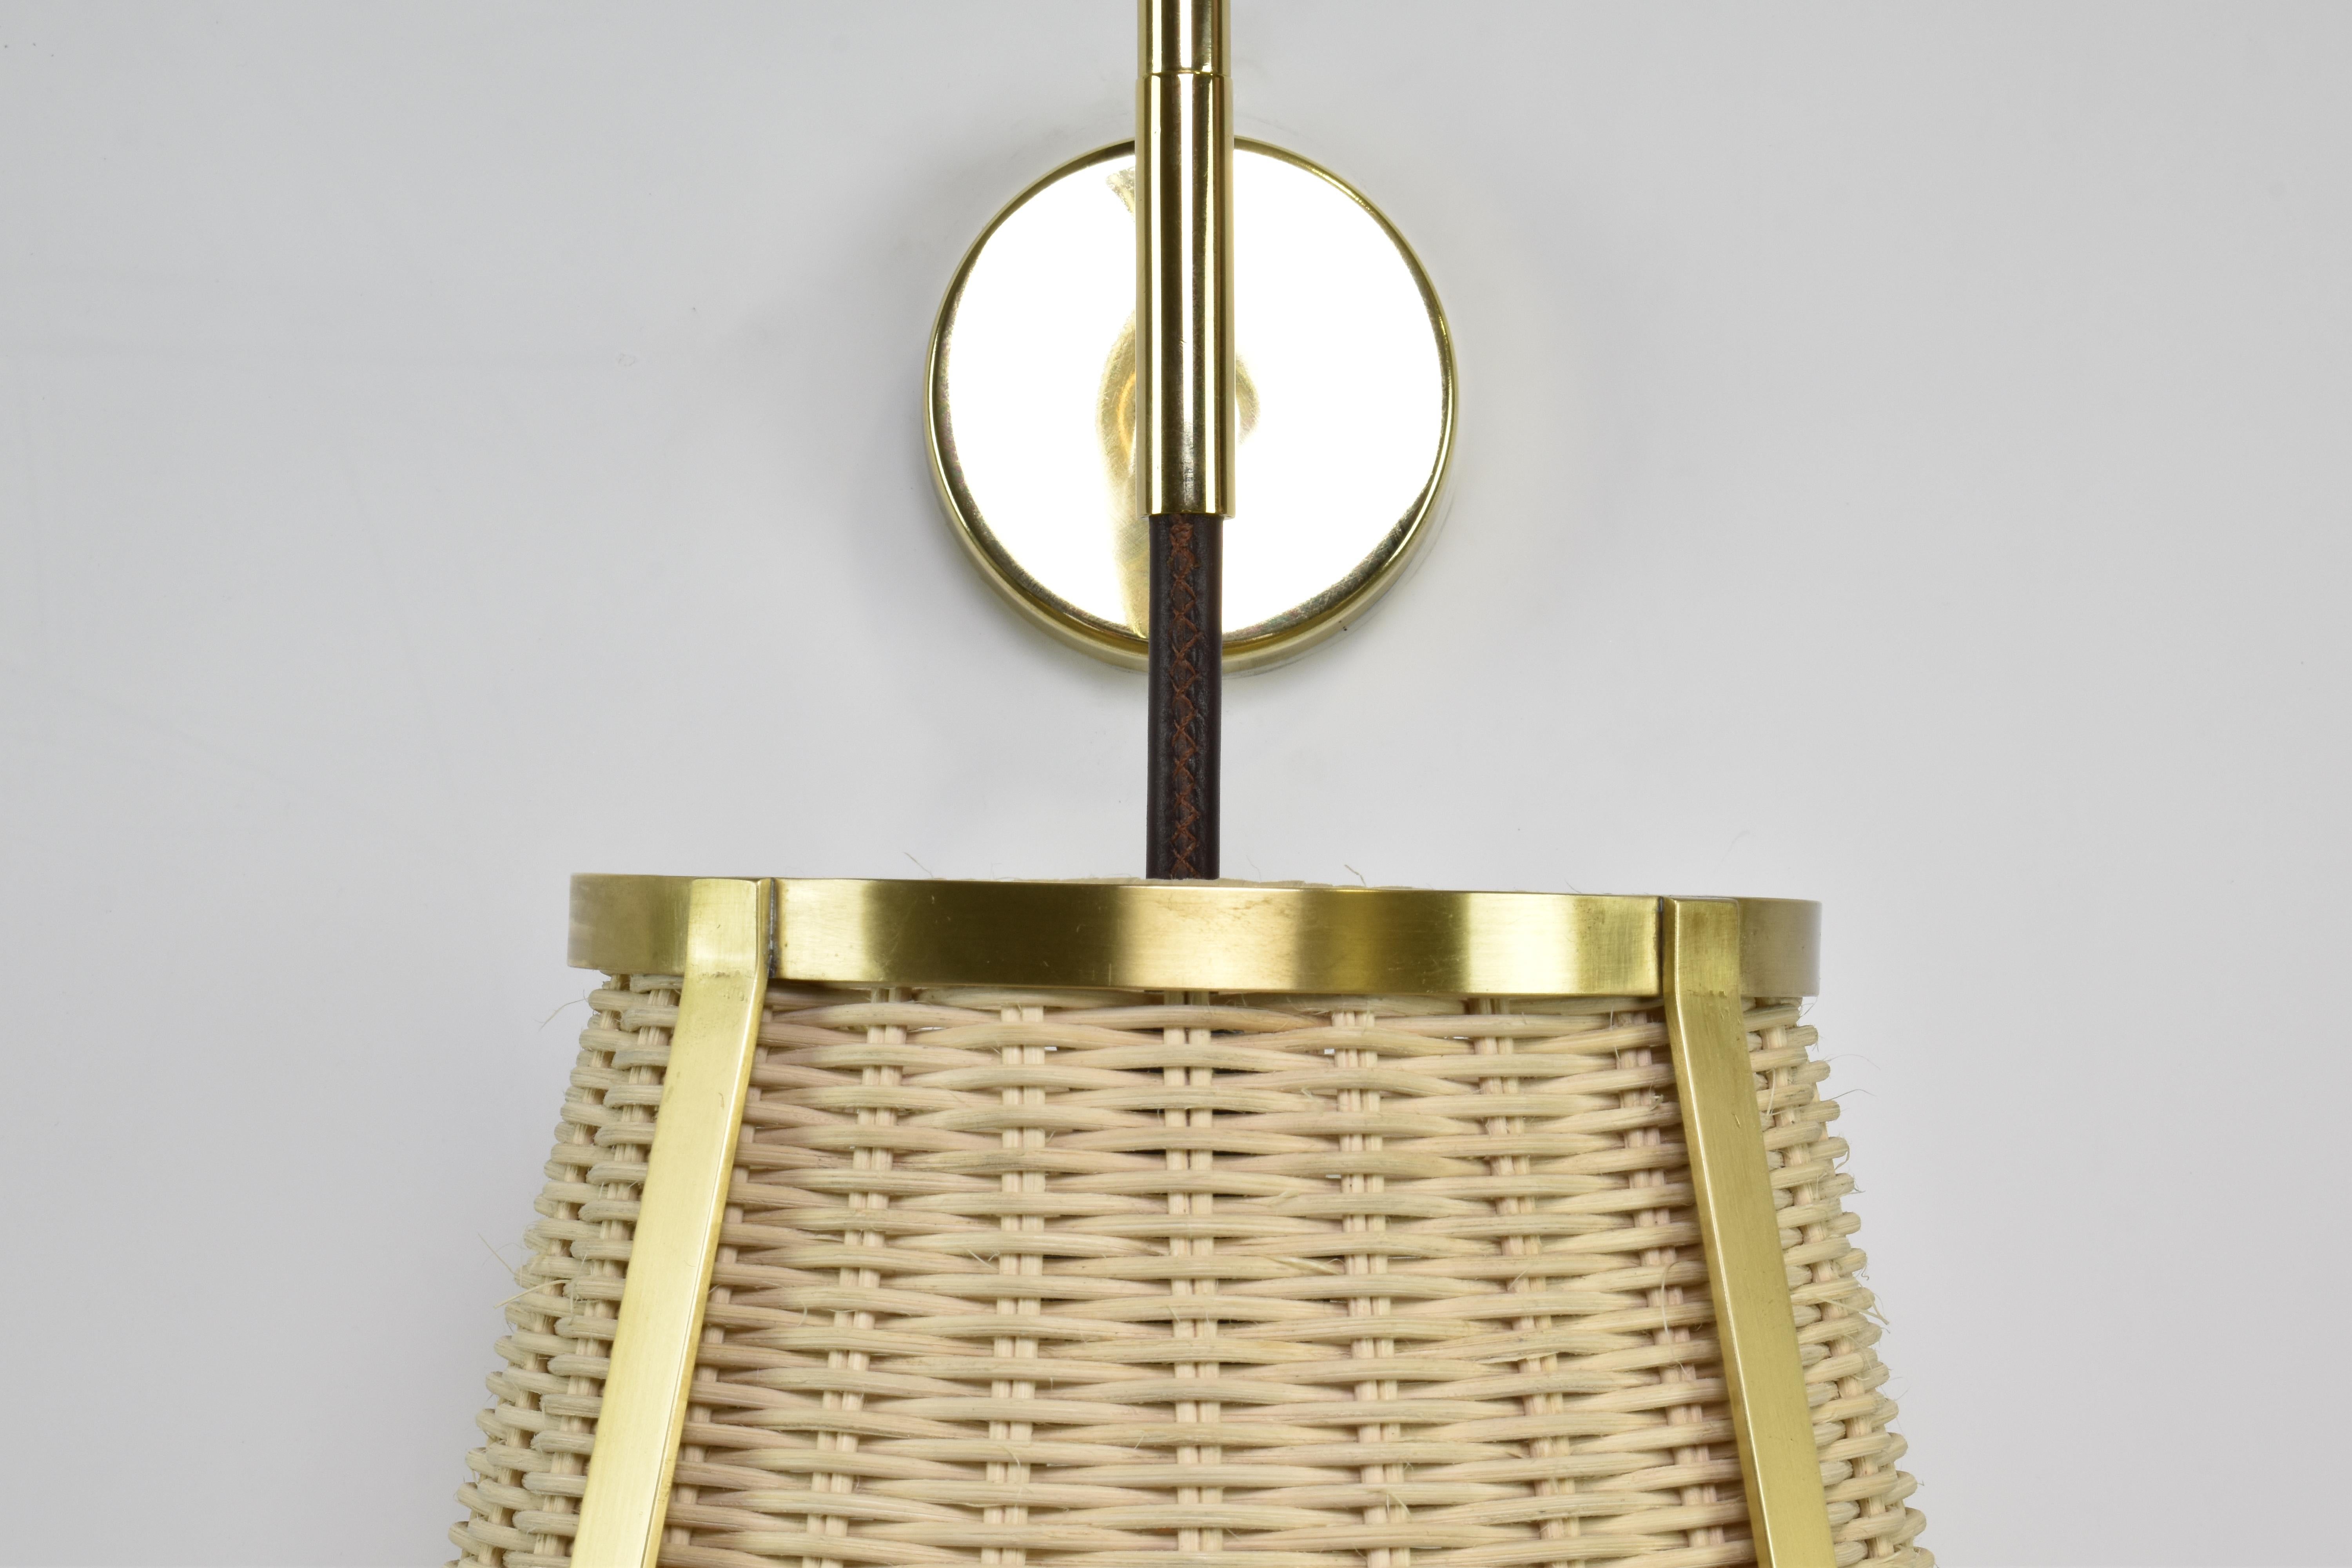 Caeli-W4 Brass and Rattan Sconce, Jas For Sale 3